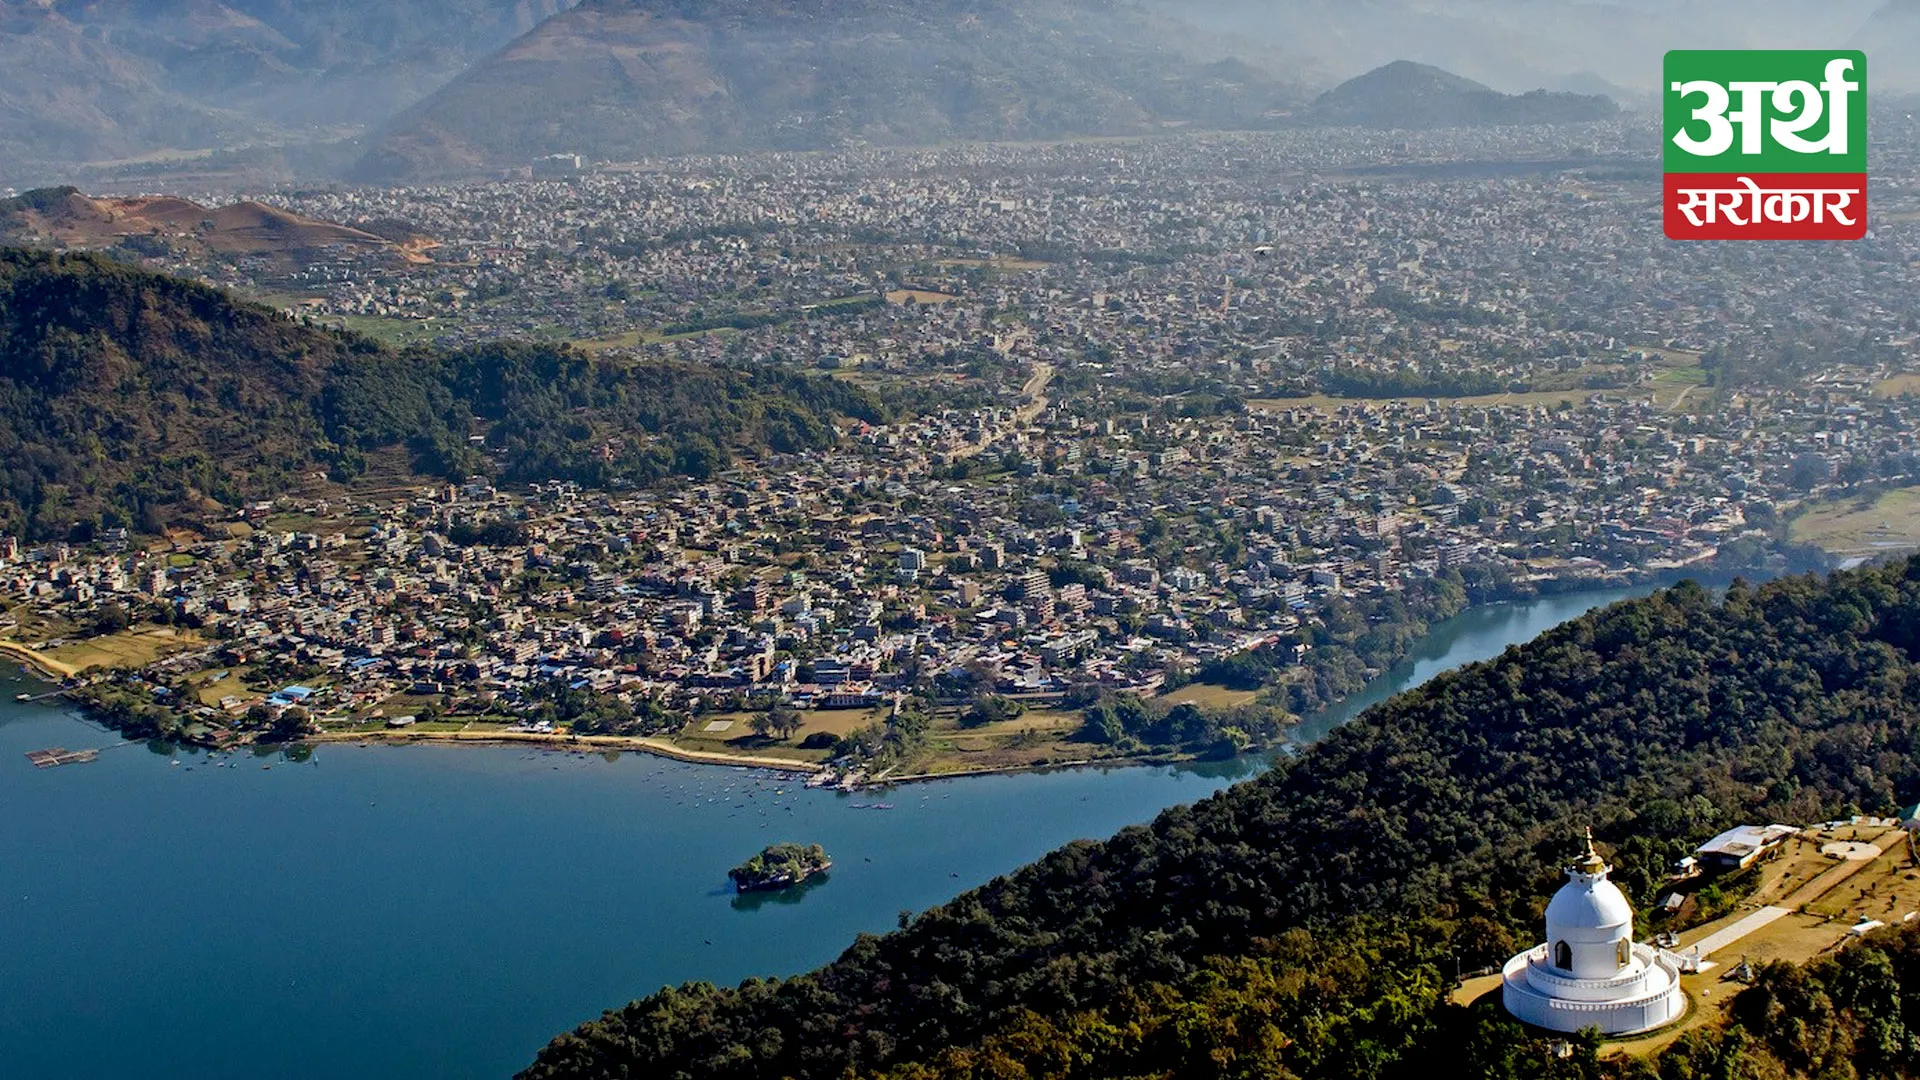 Pokhara declared as the tourism capital of Nepal